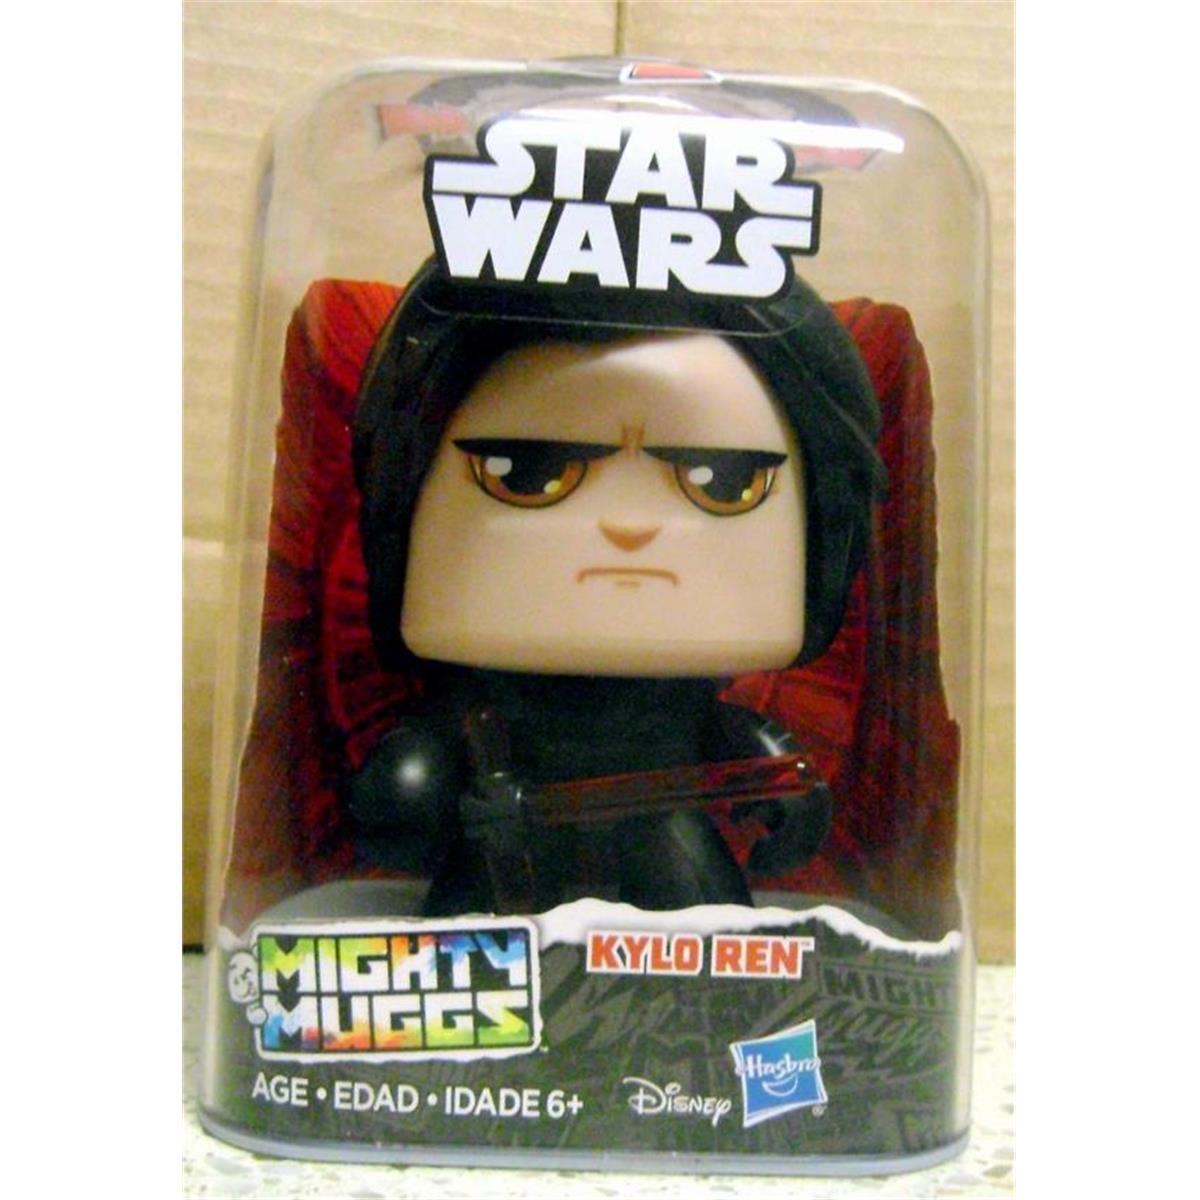 Picture of Autograph Warehouse 637315 3 x 4 in. Kylo Ren Star Wars Toy - Mighty Muggs 06 Hasbro Disney Nib